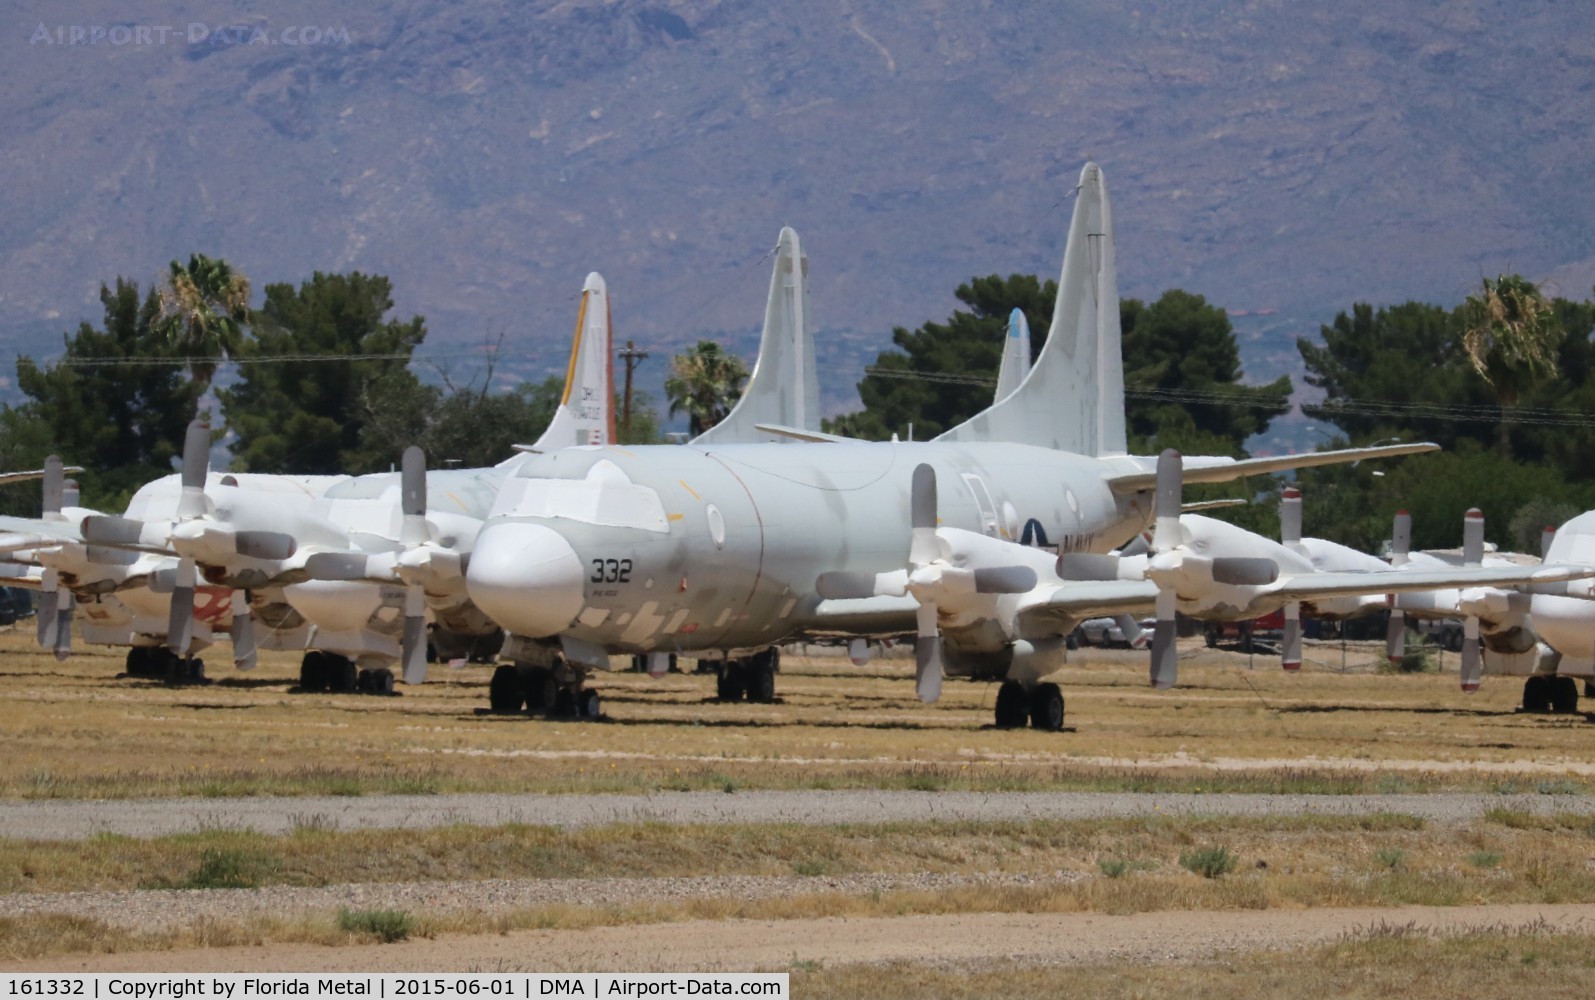 161332, Lockheed P-3C Orion C/N 285A-5729, P-3C Orion